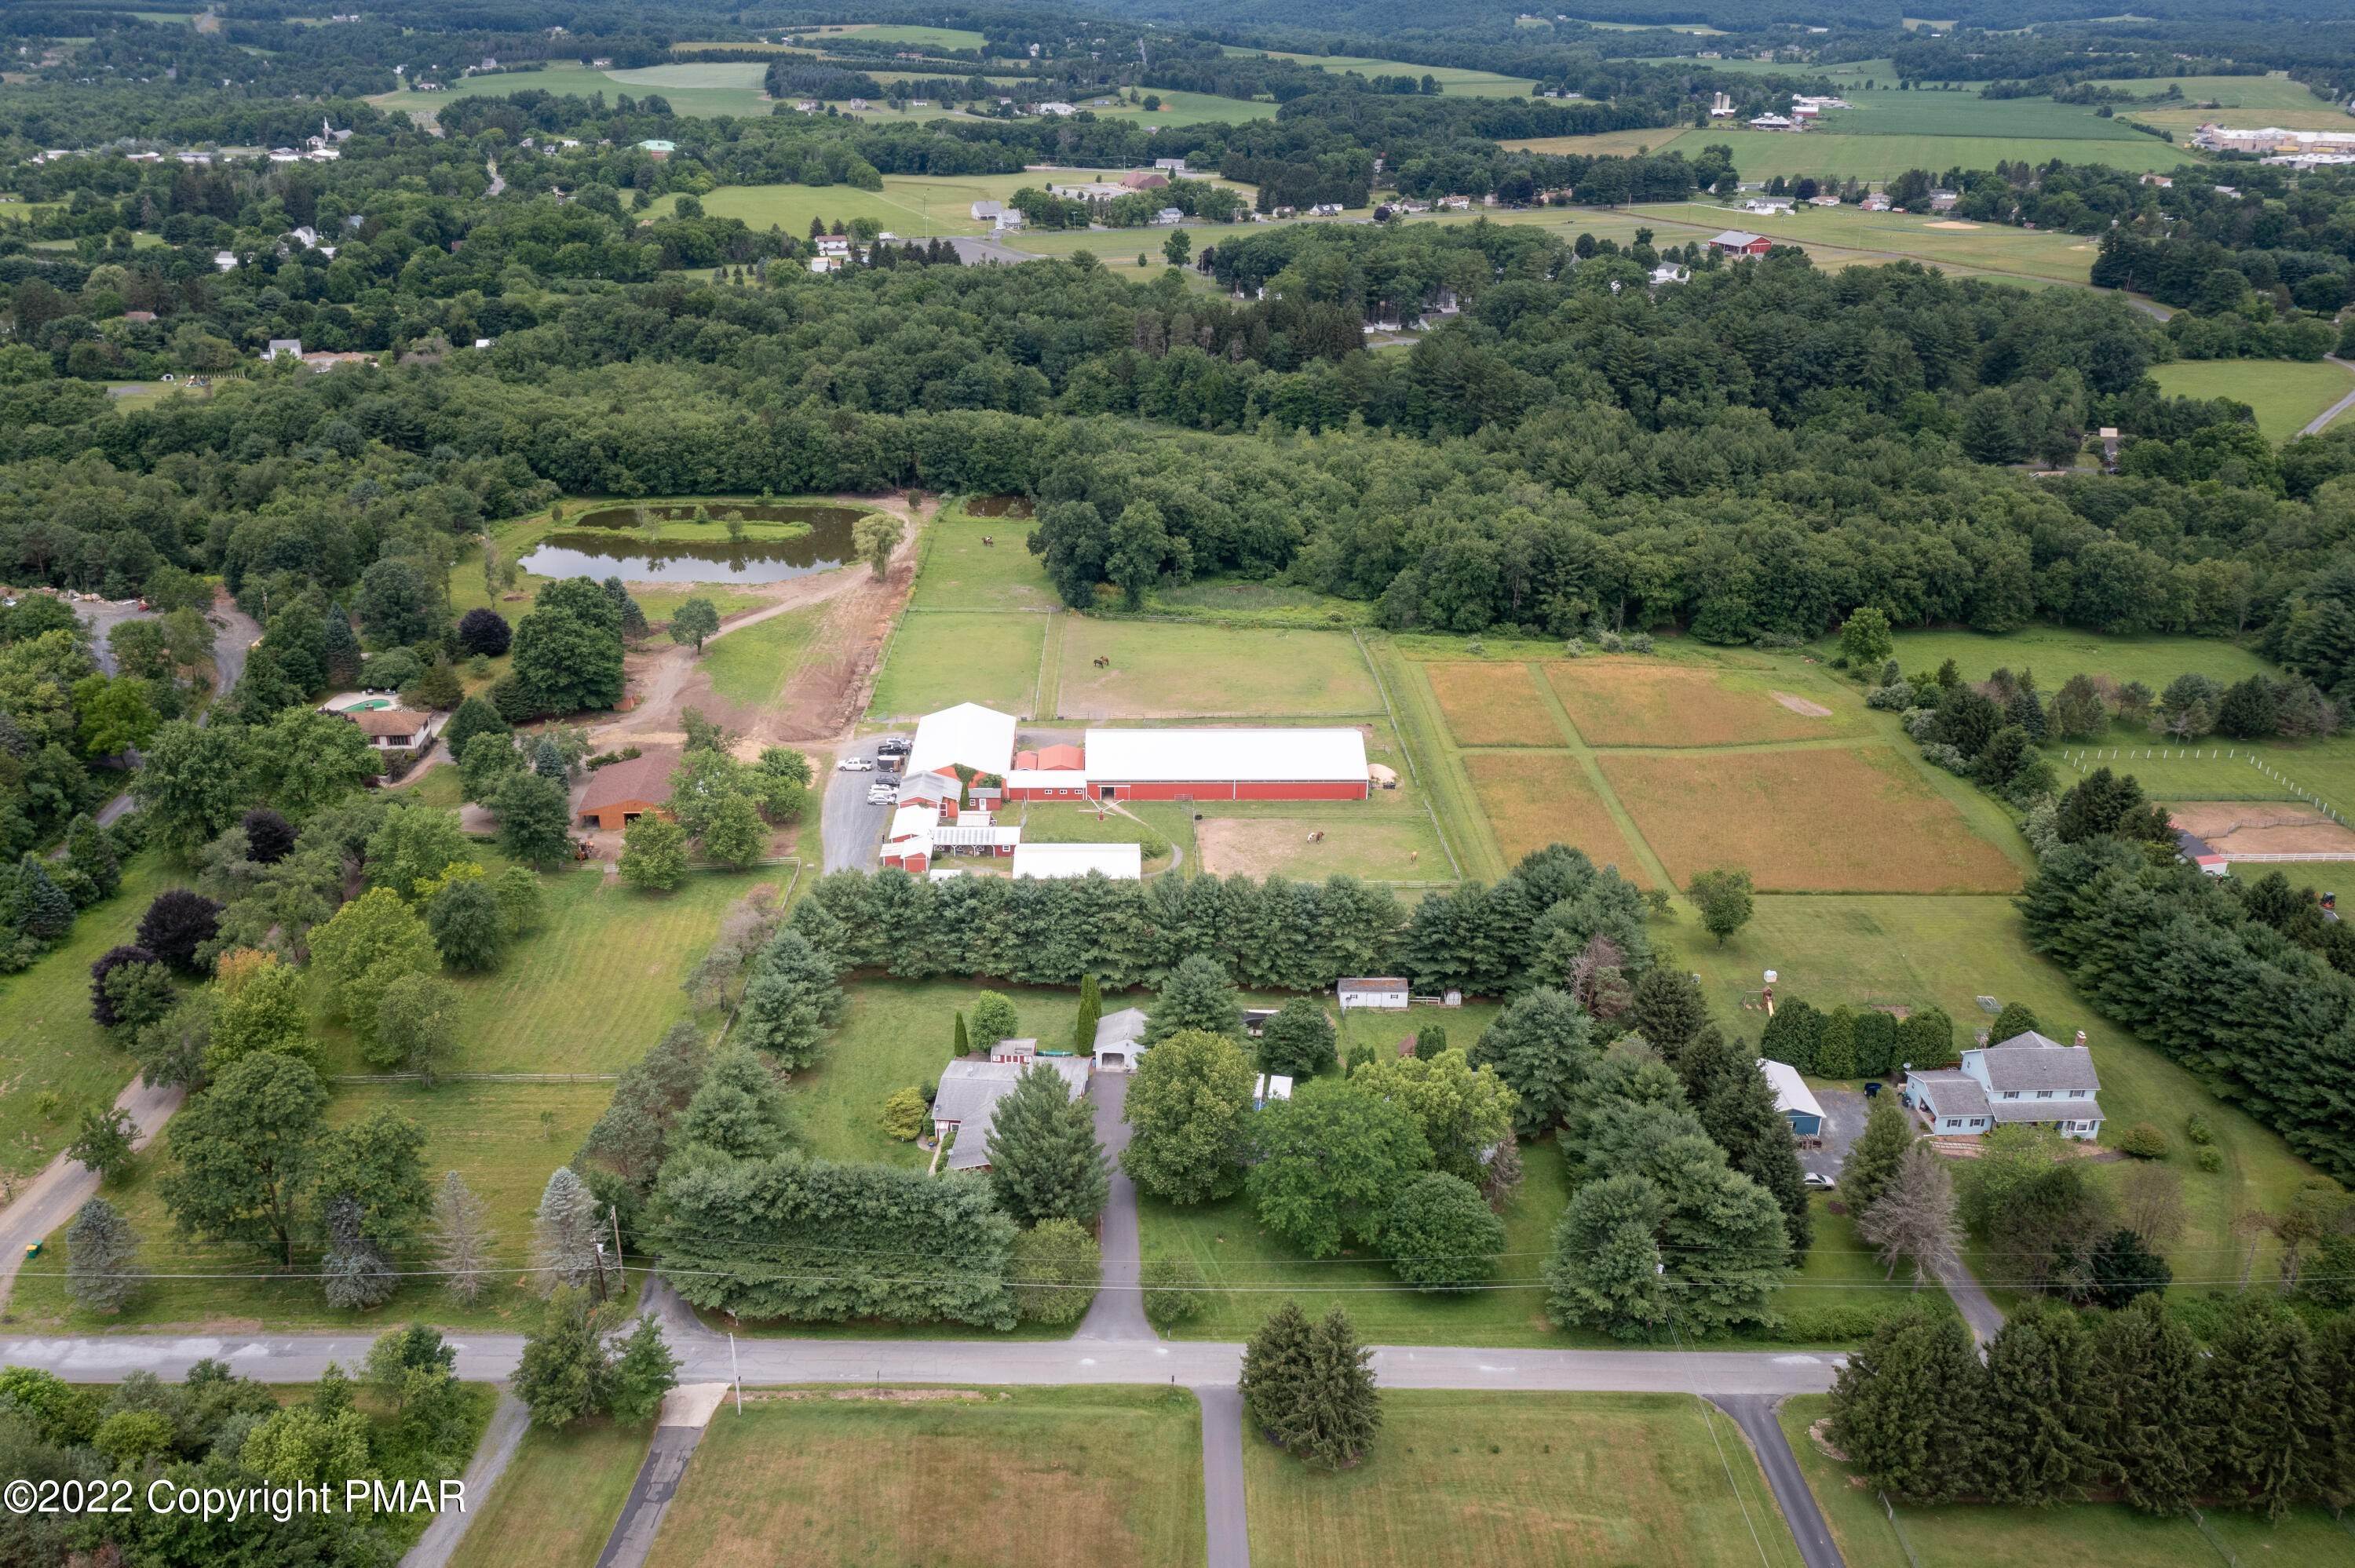 Farm and Ranch Properties for Sale at 167 Old Stagecoach Road Gilbert, Pennsylvania 18331 United States